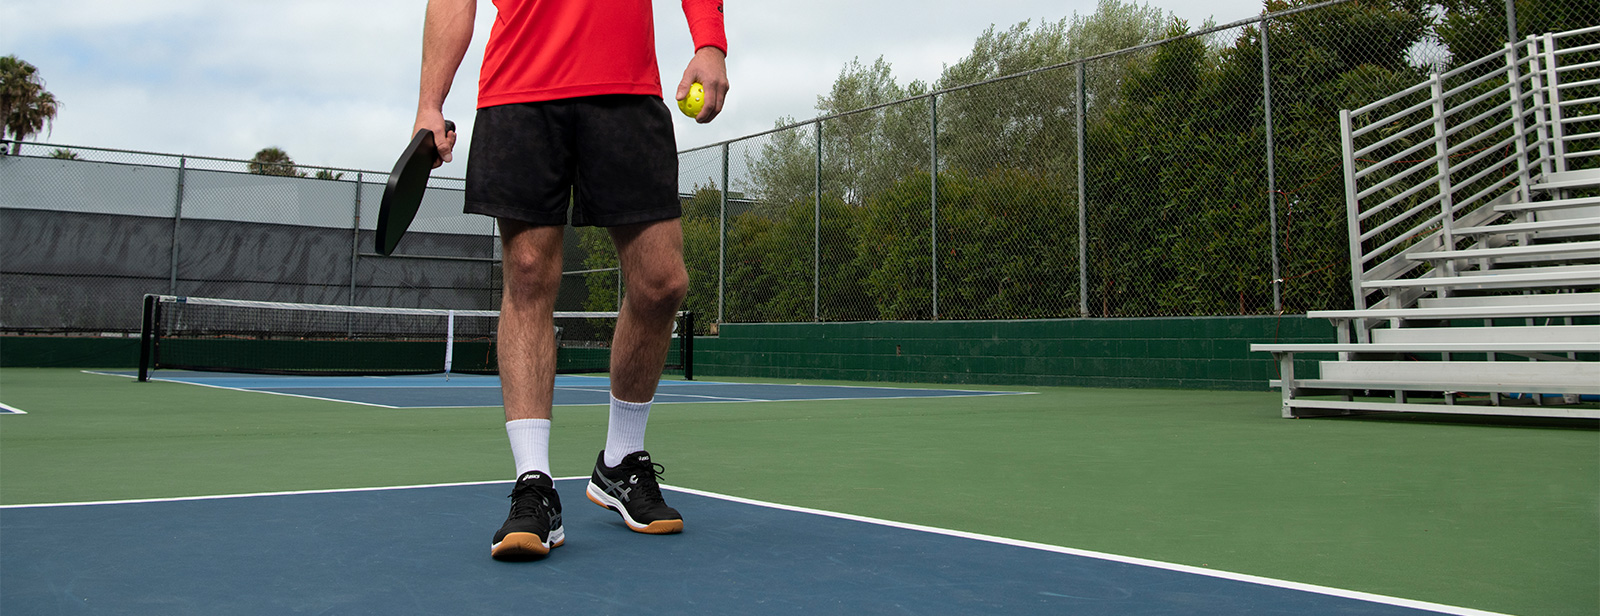 Tips for Playing Tennis on Grass